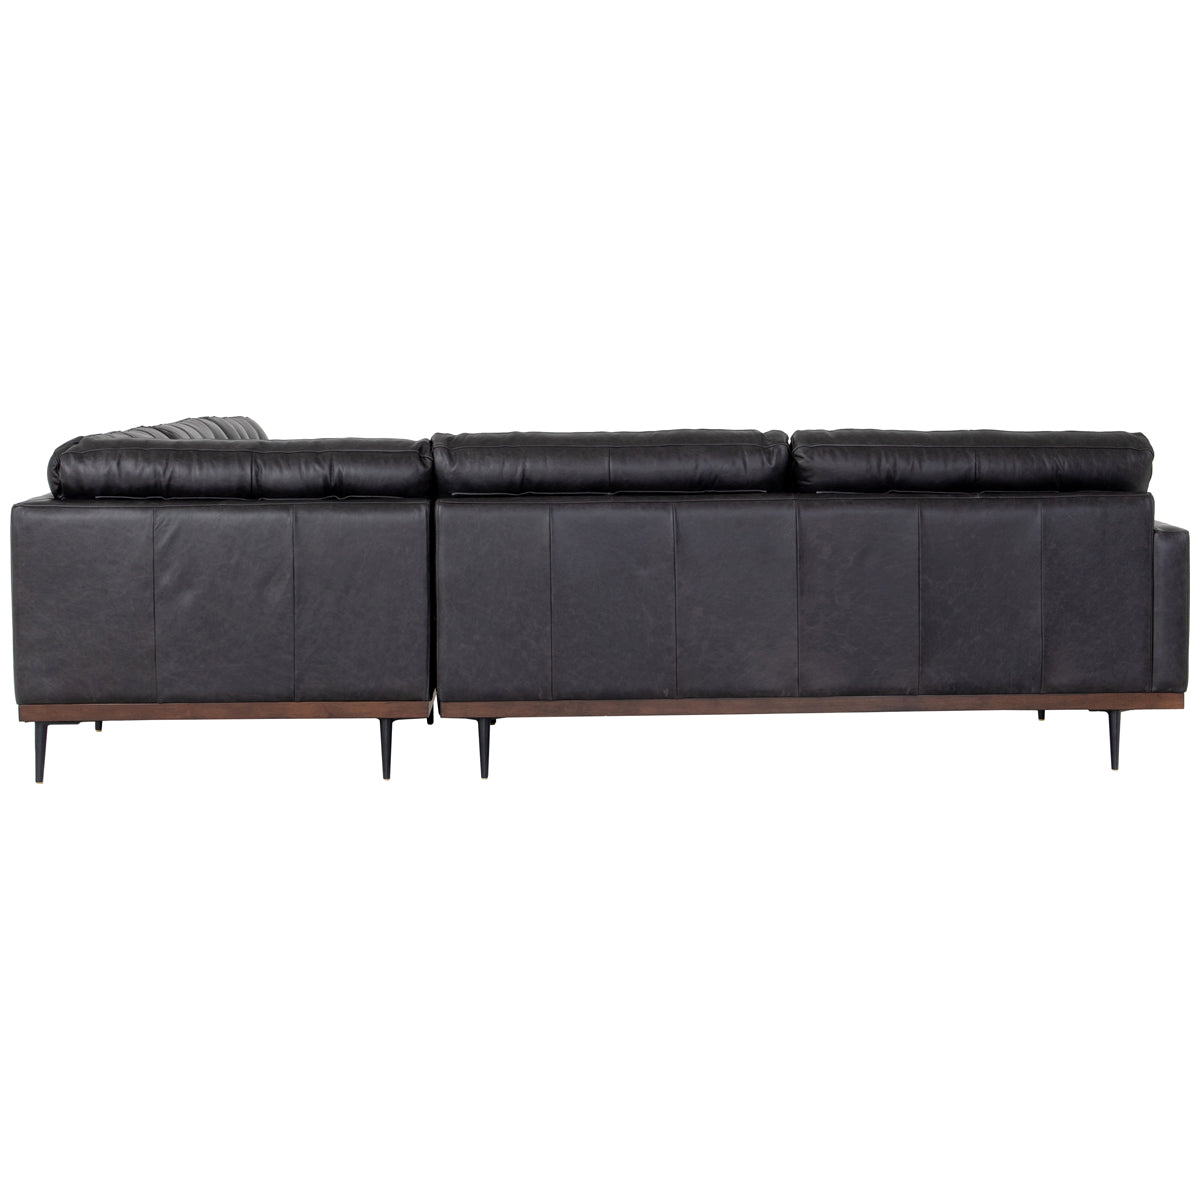 Four Hands Norwood Lexi 3-Piece Leather Sectional